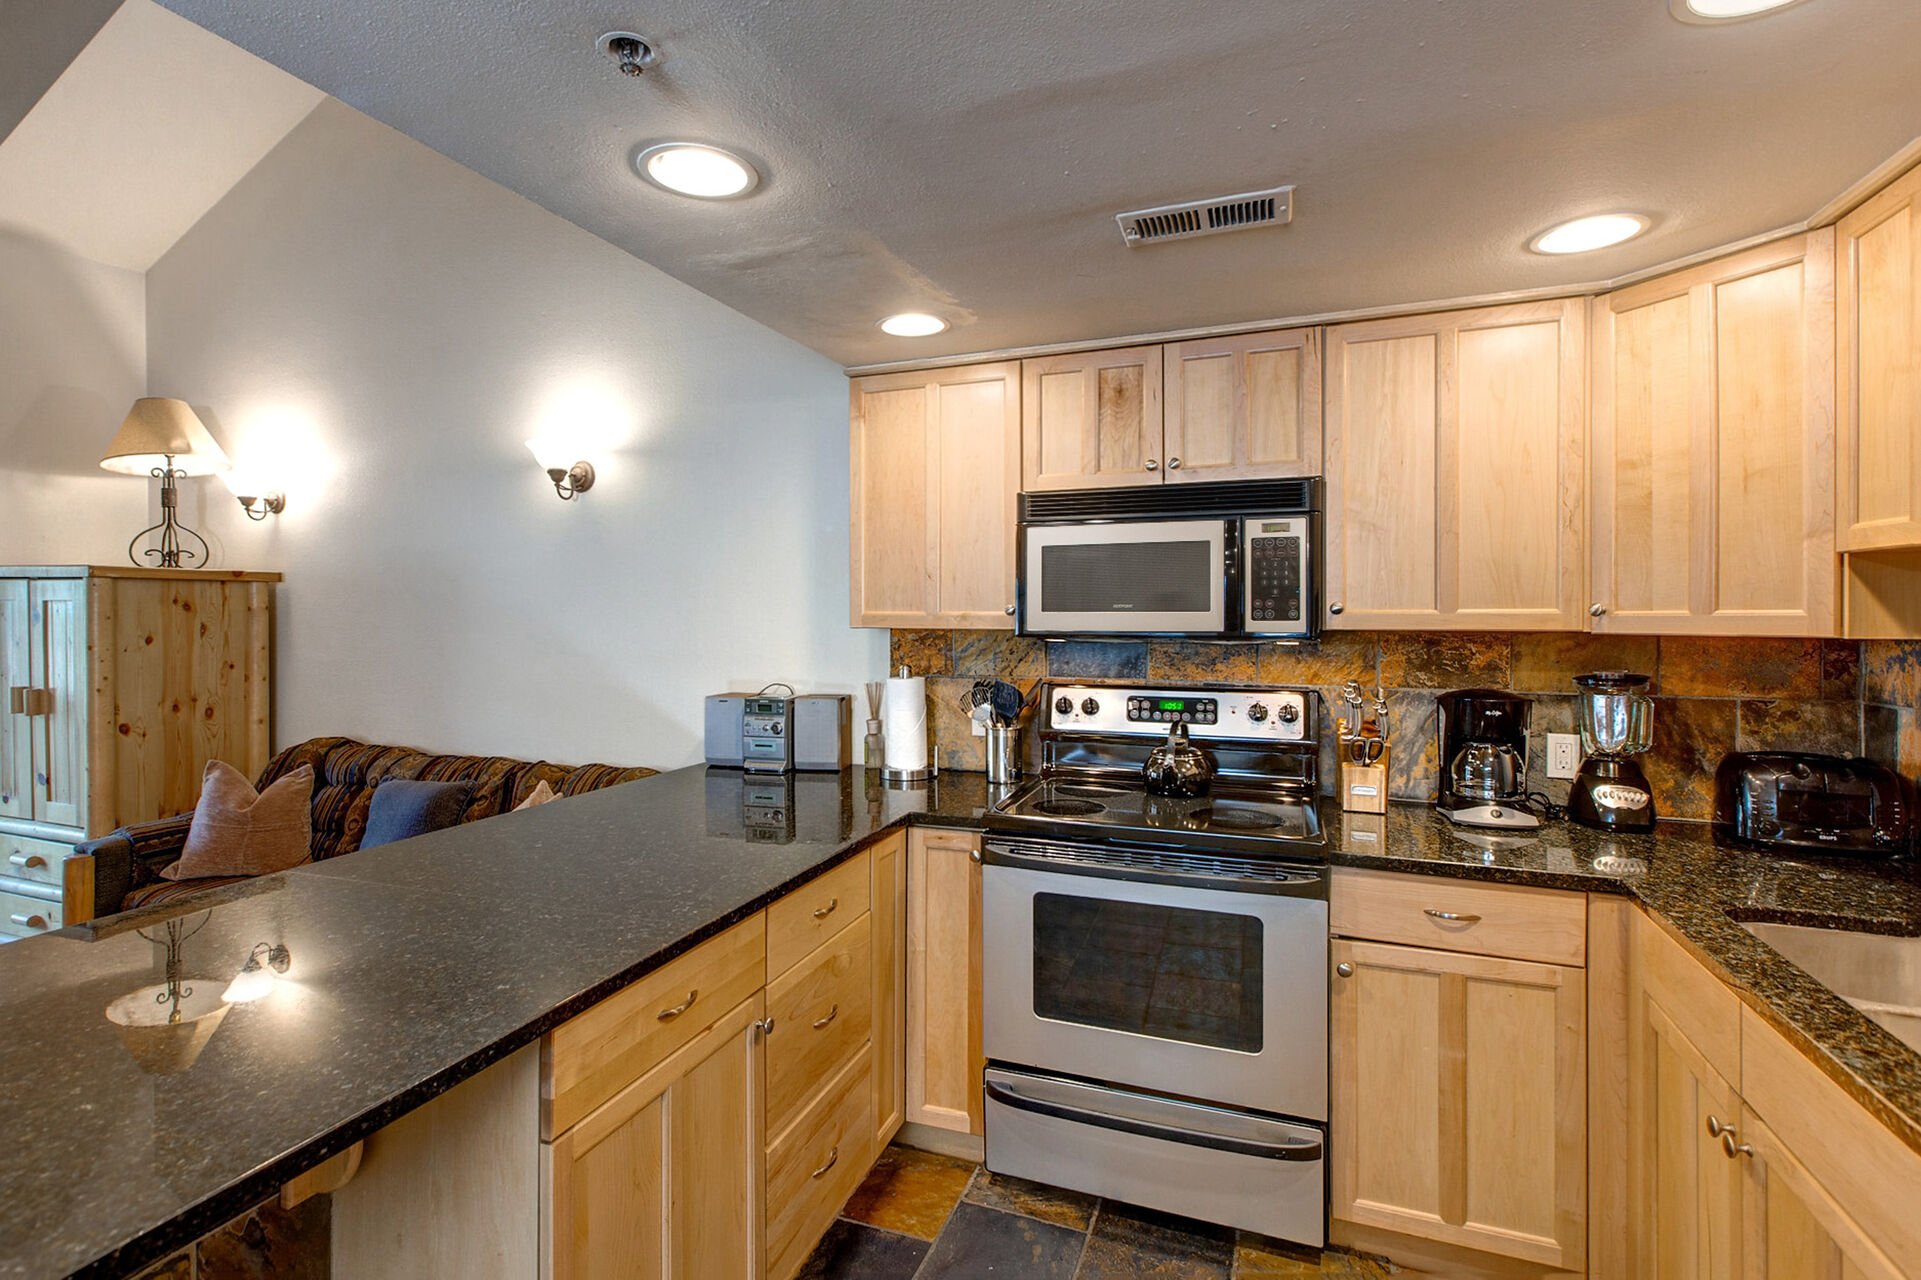 Fully Equipped Kitchen with Stainless Steel Appliances, Bar Seating for 4